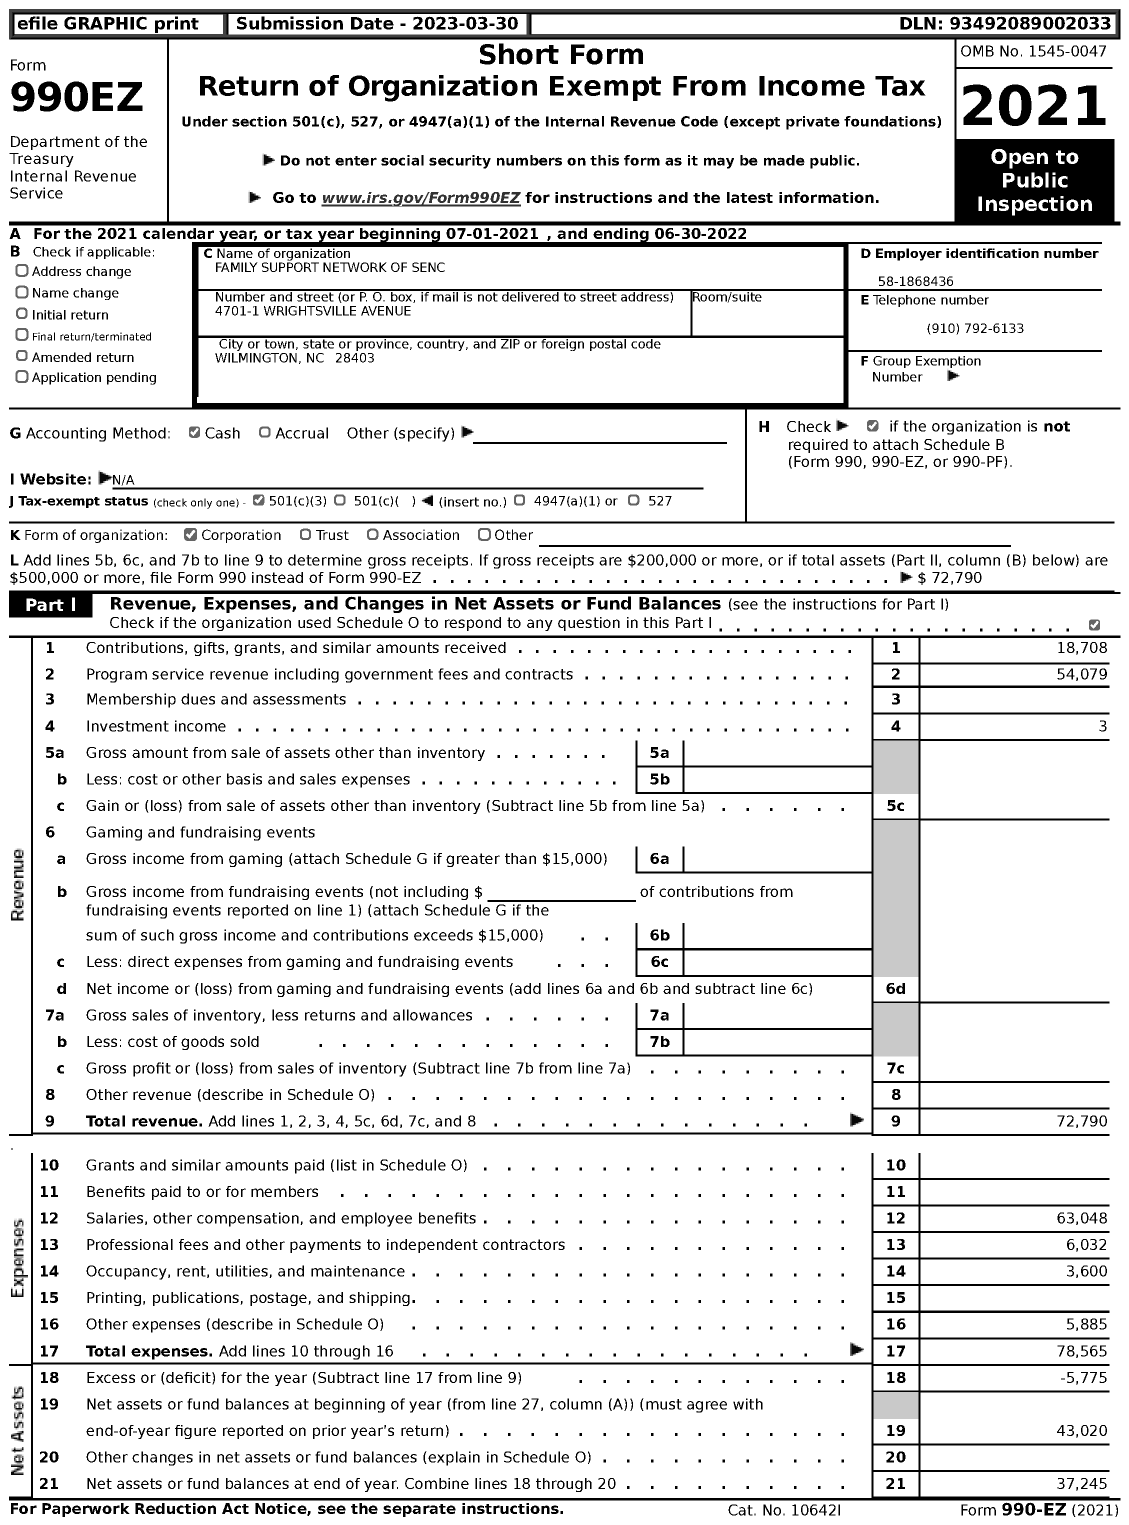 Image of first page of 2021 Form 990EZ for Family Support Network of Sync